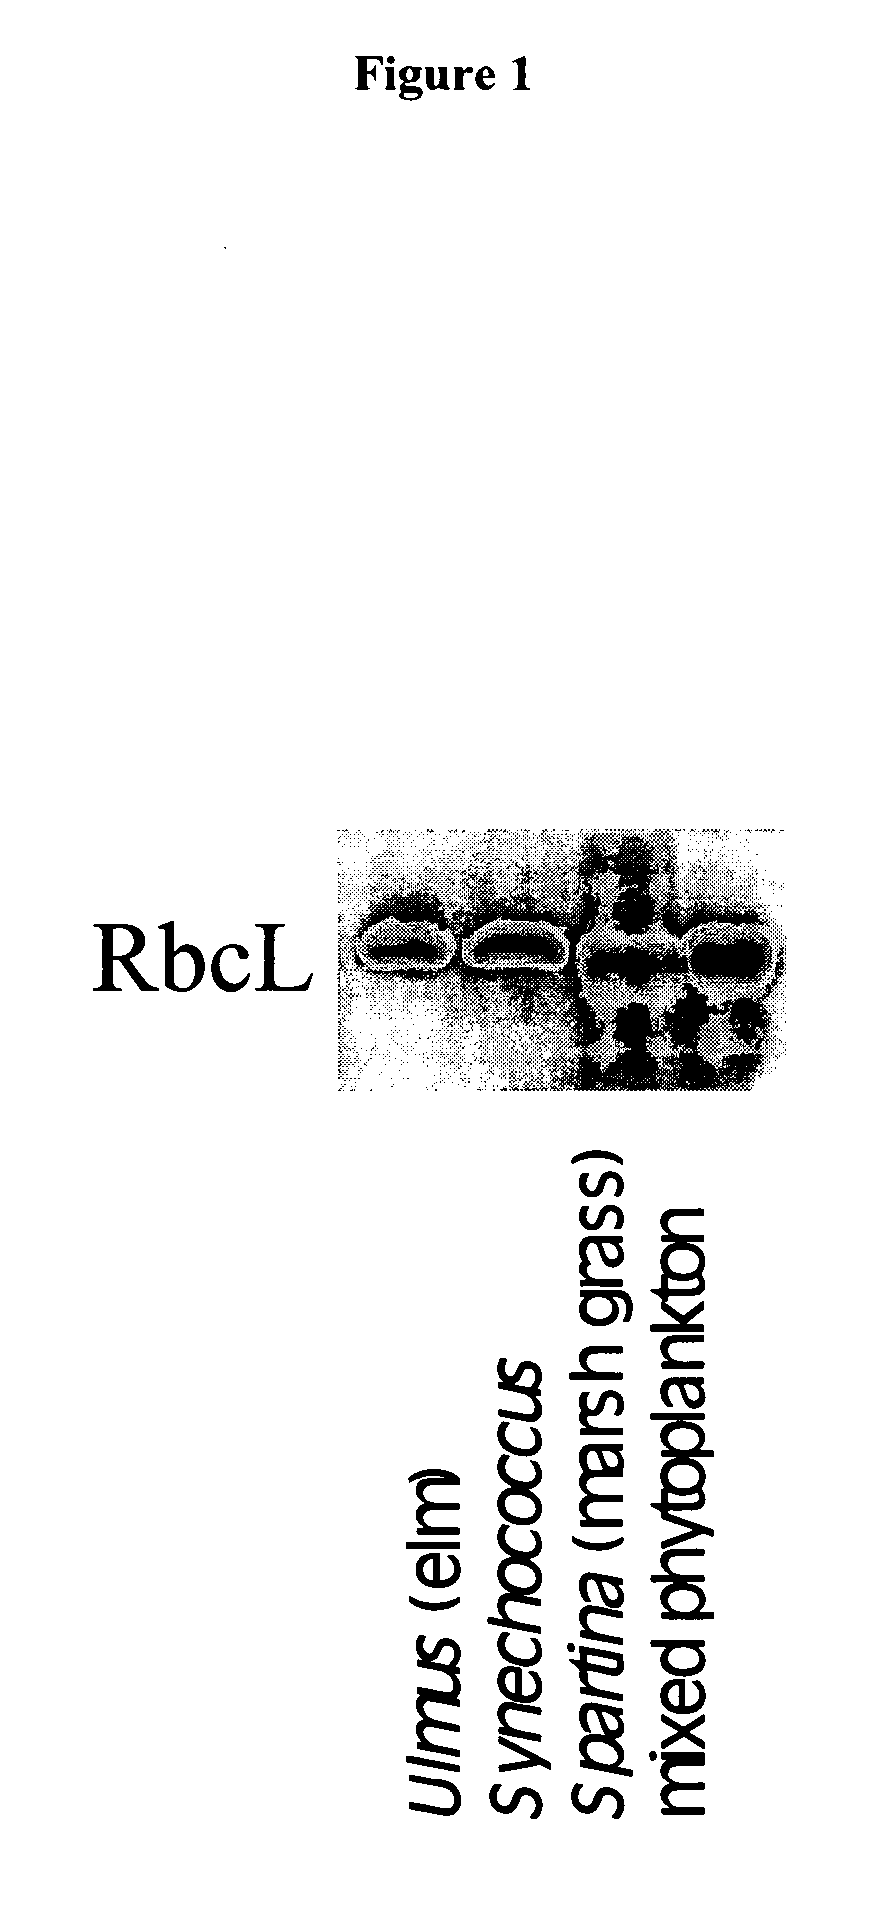 Peptide sequence tags and method of using same